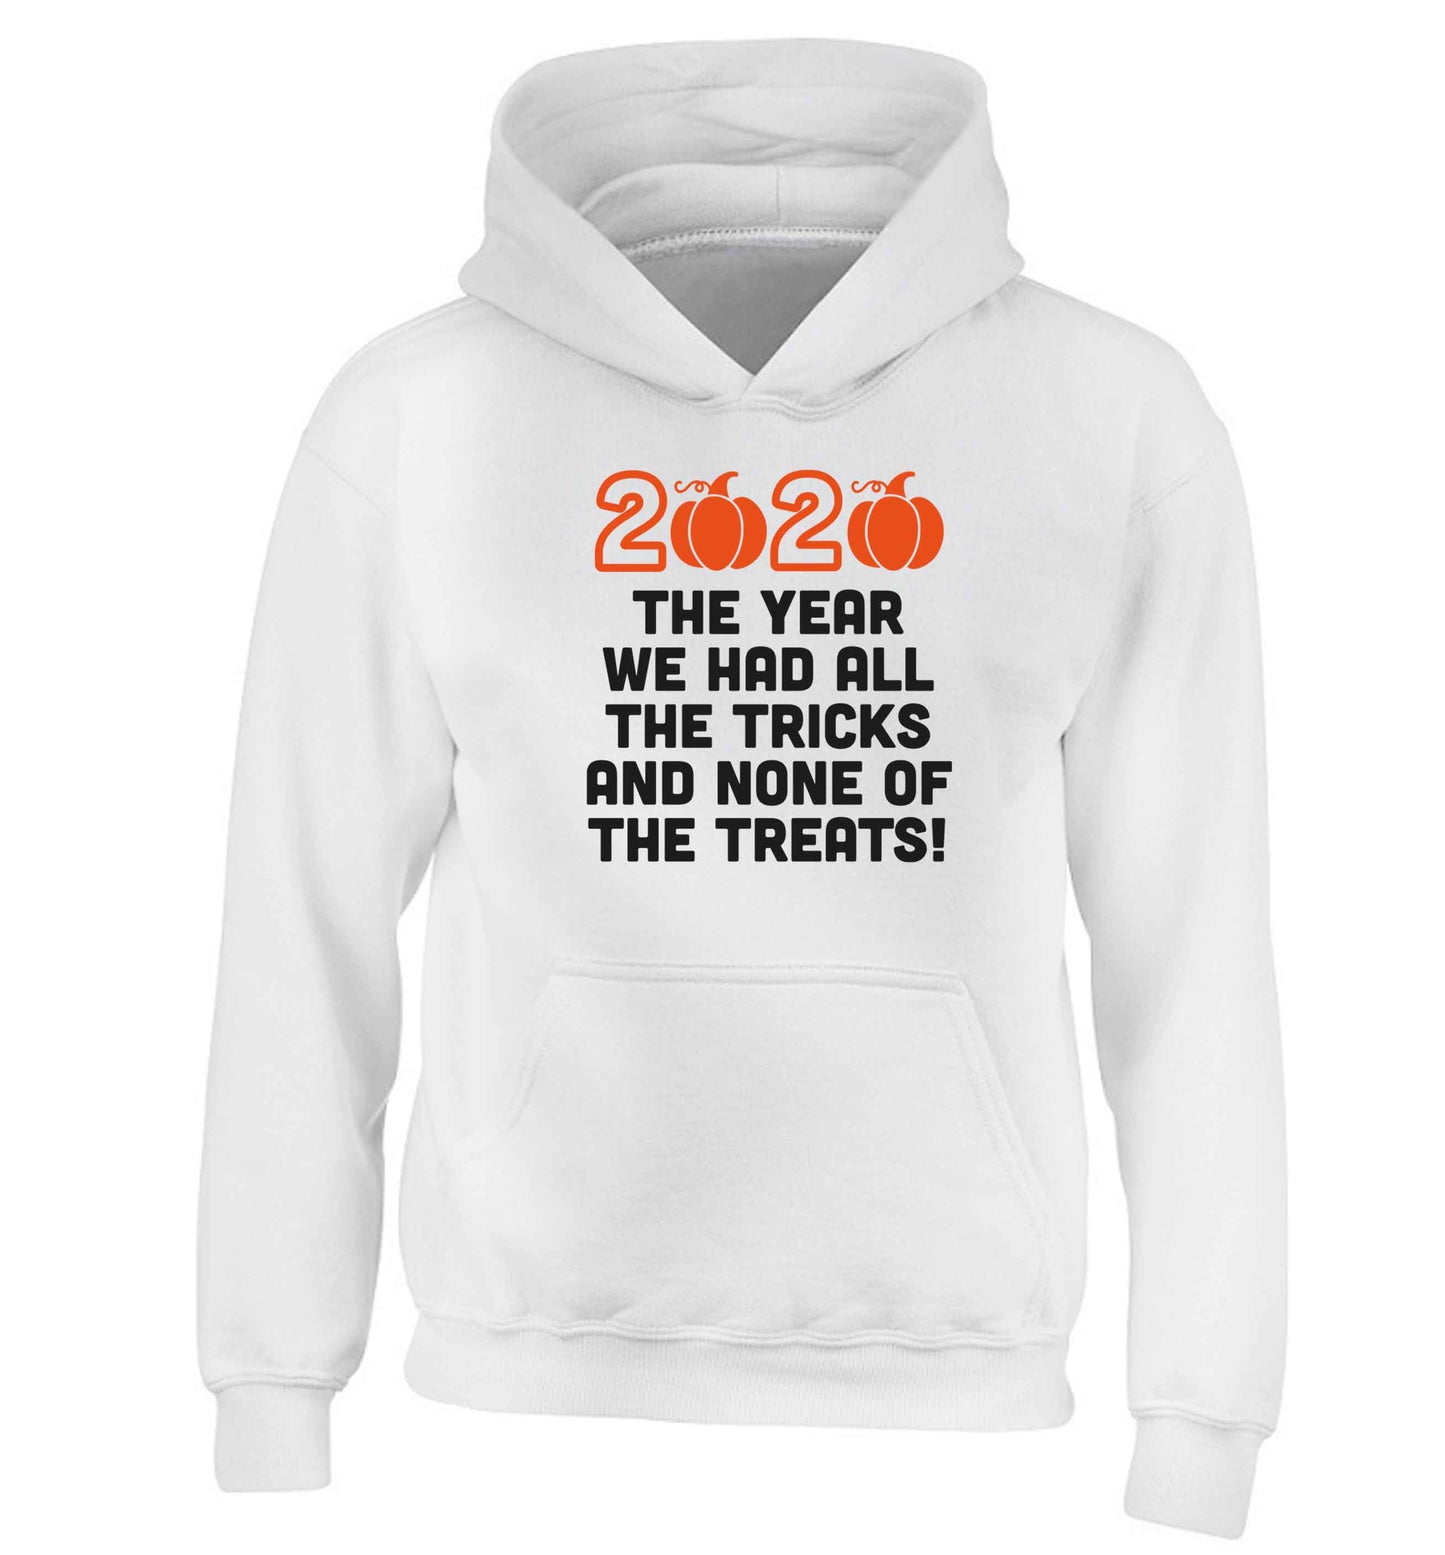 2020 The year we had all of the tricks and none of the treats children's white hoodie 12-13 Years